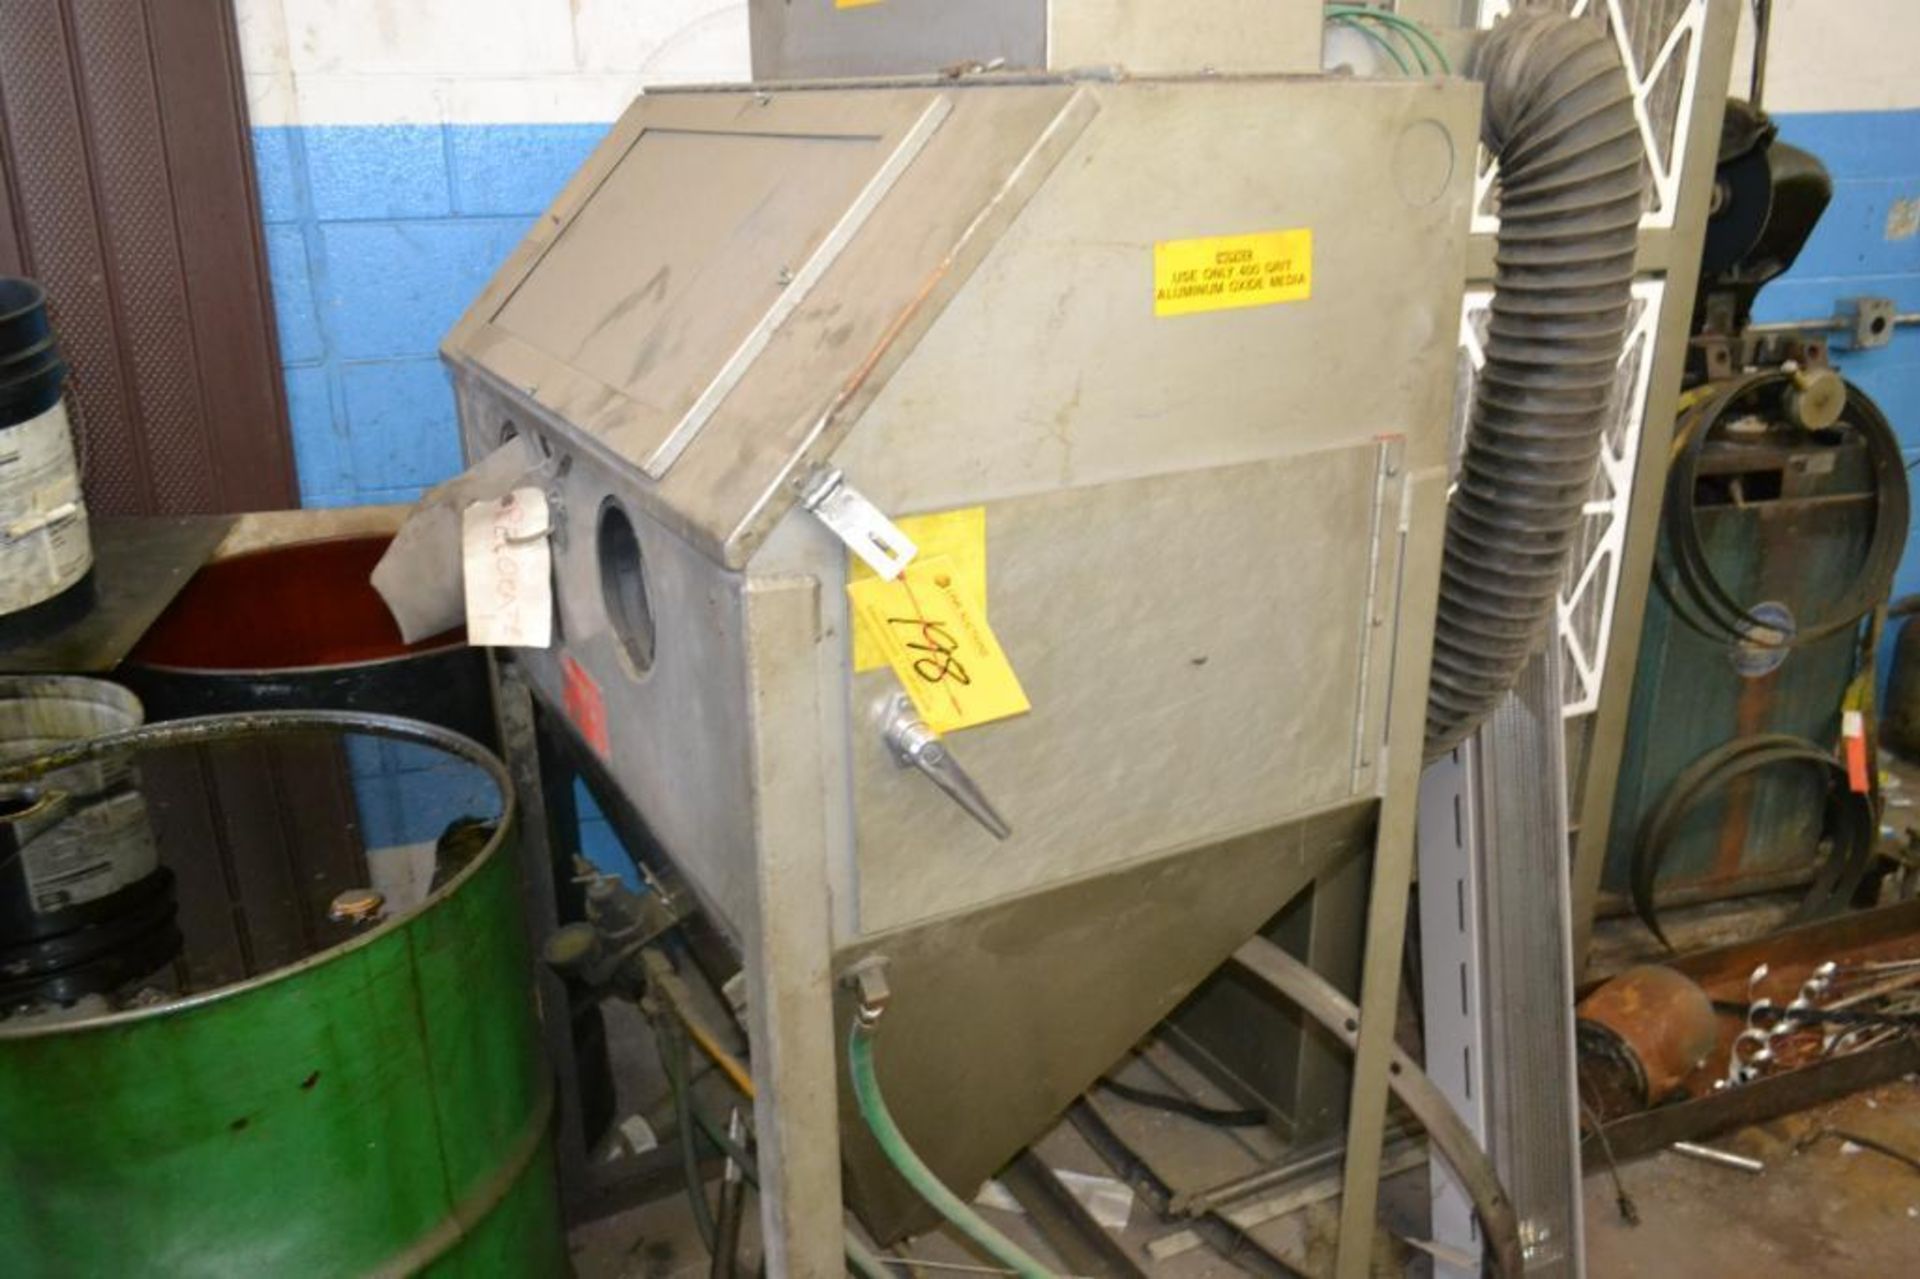 Trinco 2-Hole Reach-in Blast Cabinet Model 36-Deluxe, S/N 35969-1, with Trinco Dust Collector - Image 3 of 3